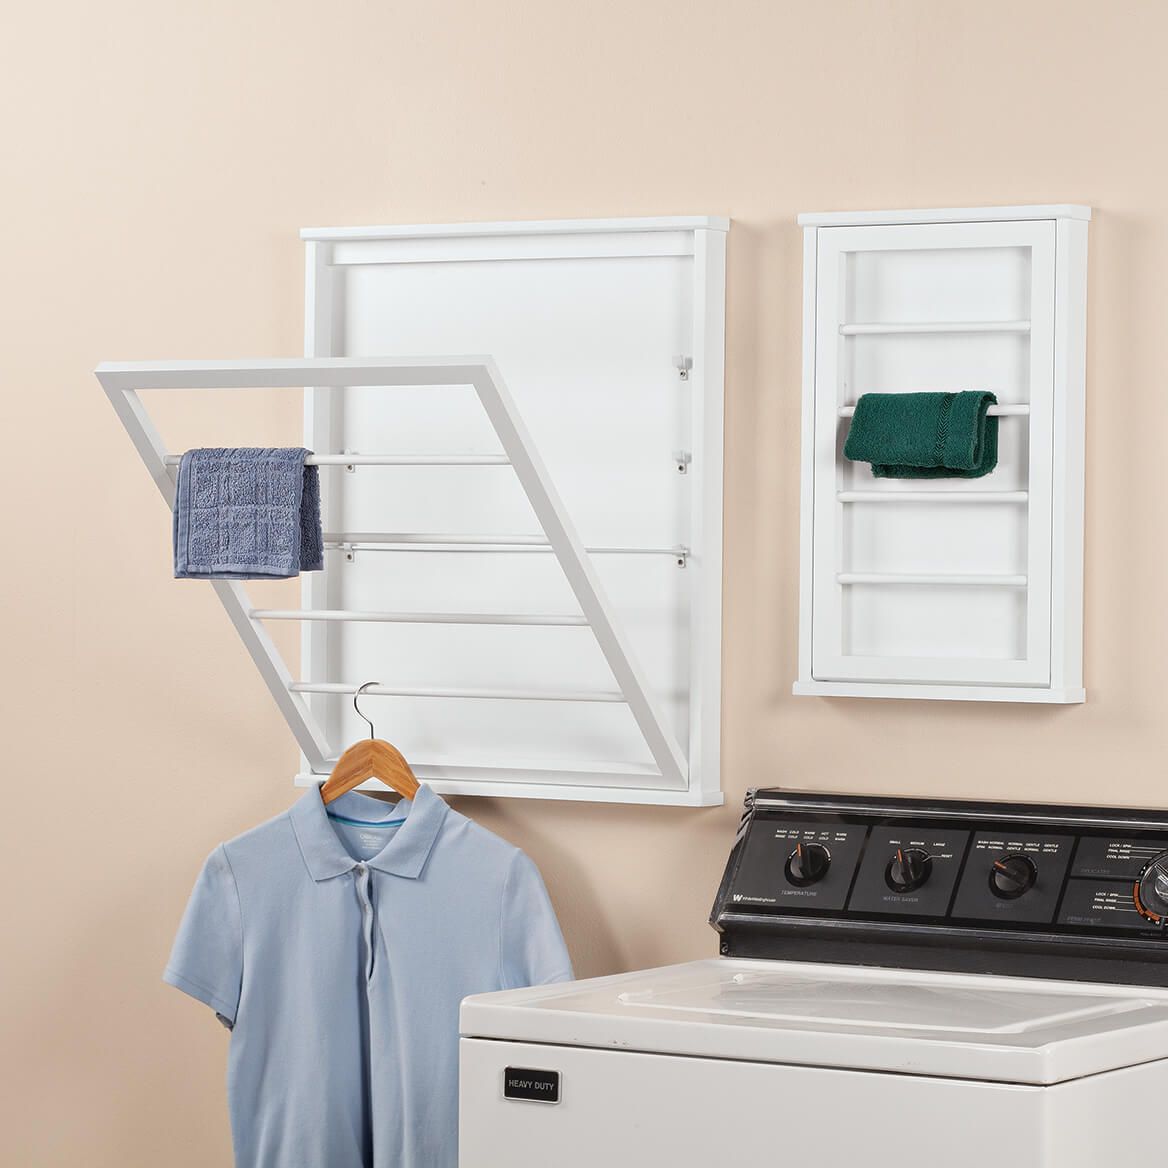 WallMounted Laundry Drying Rack Space Saving Design Durable